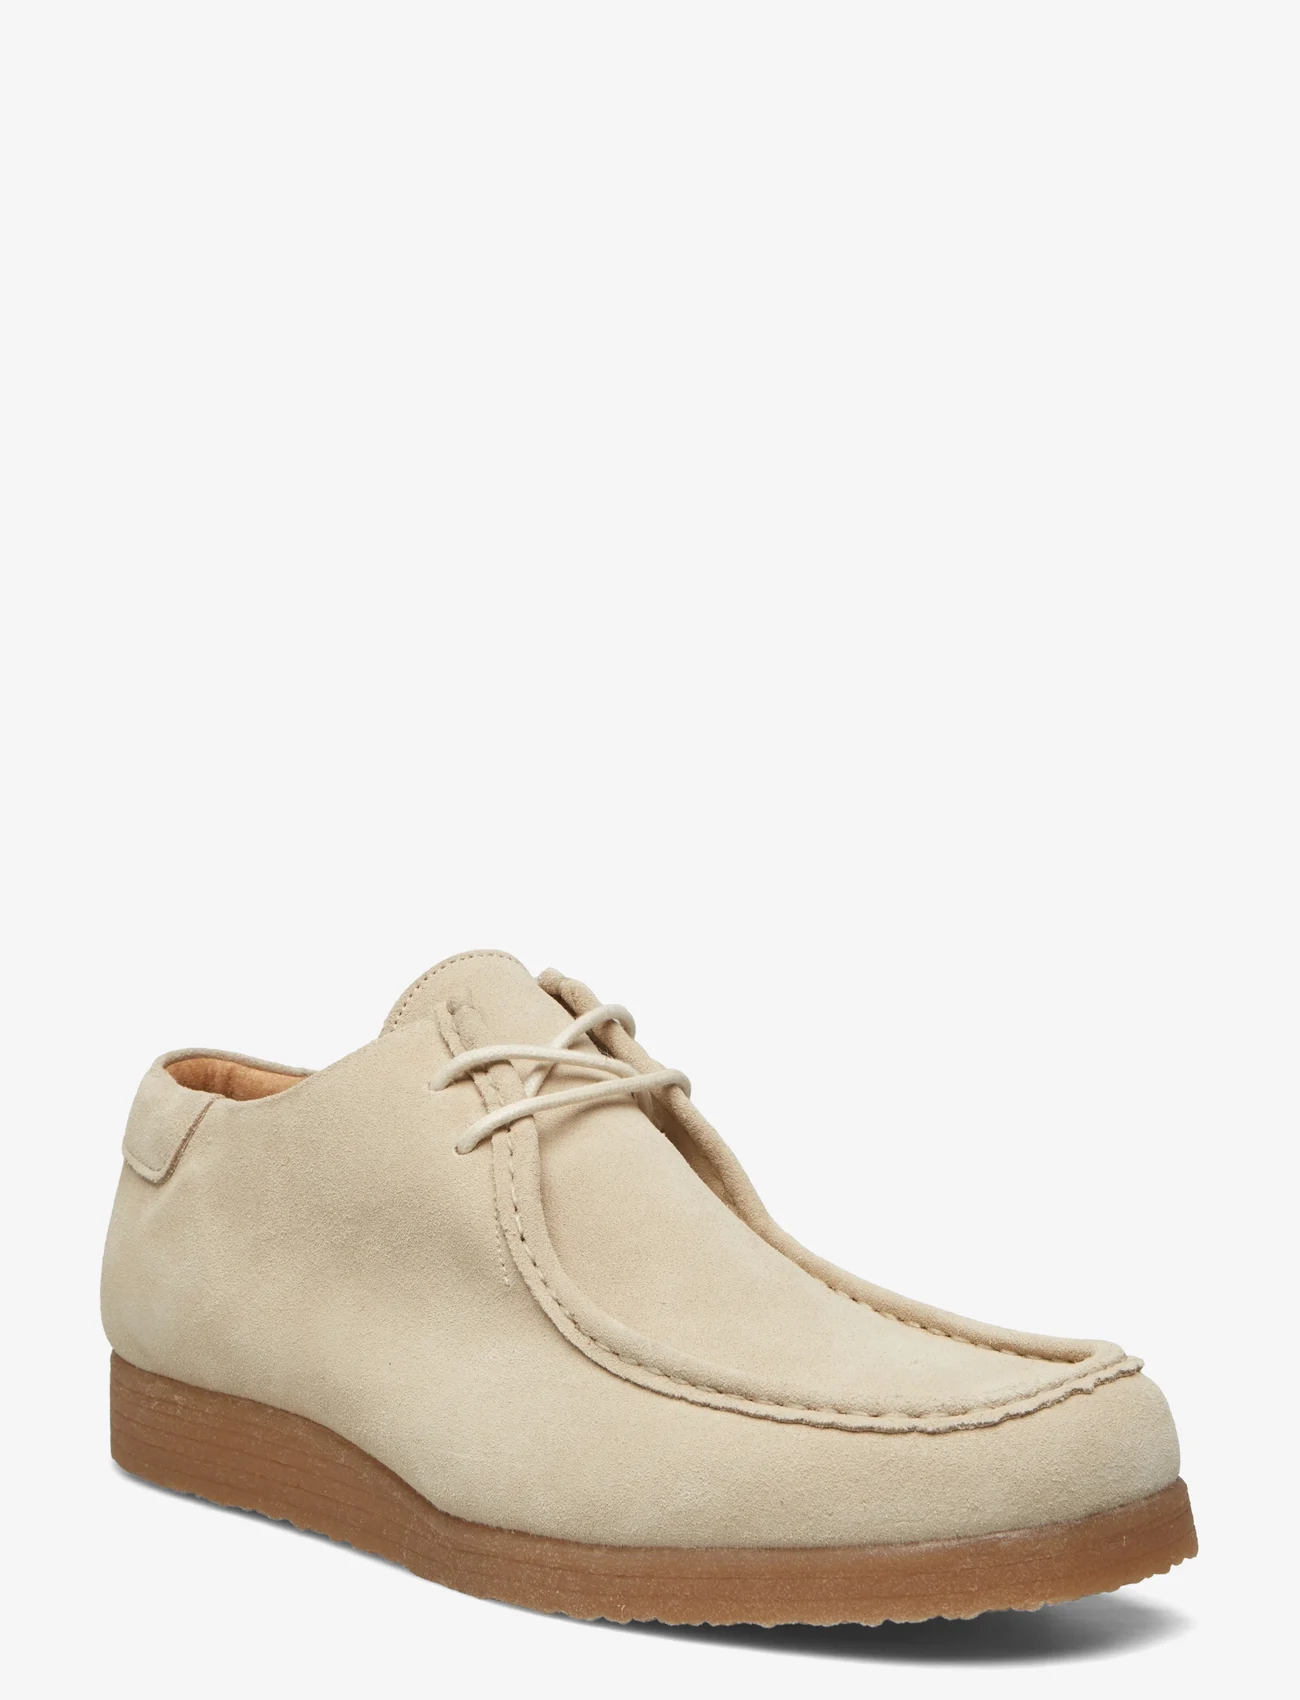 Selected Homme - SLHCHRISTOPHER NEW SUEDE MOC-TOE SHOE B - desert boots - oatmeal - 0